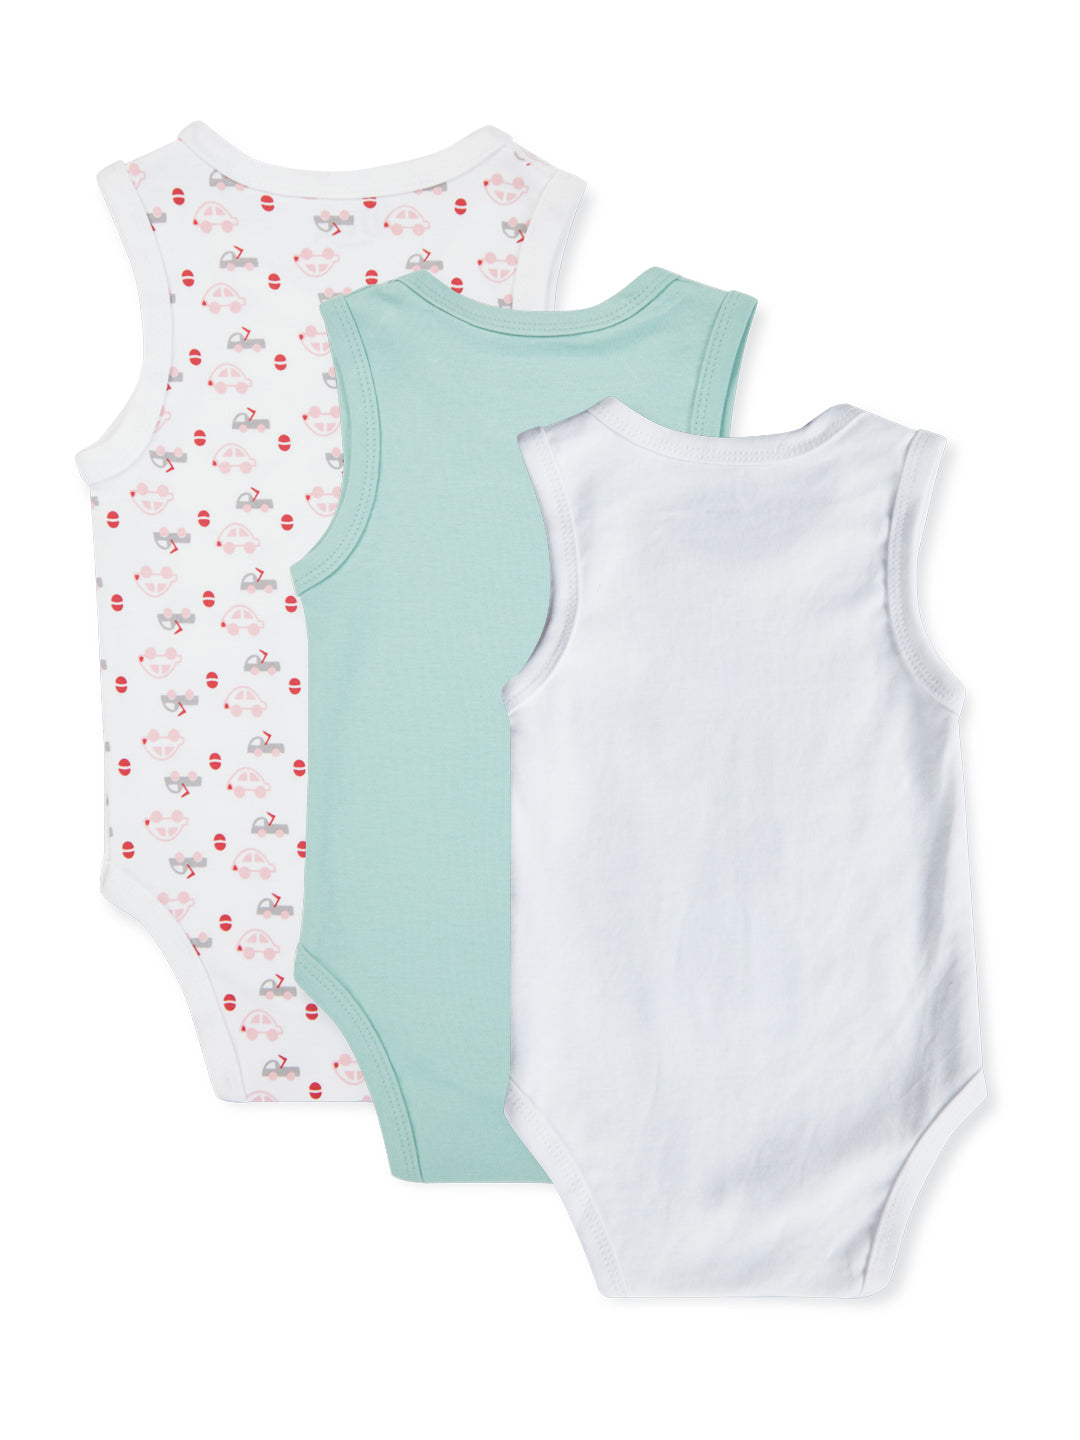 Baby boys Set of 3 light coloured knitted rompers